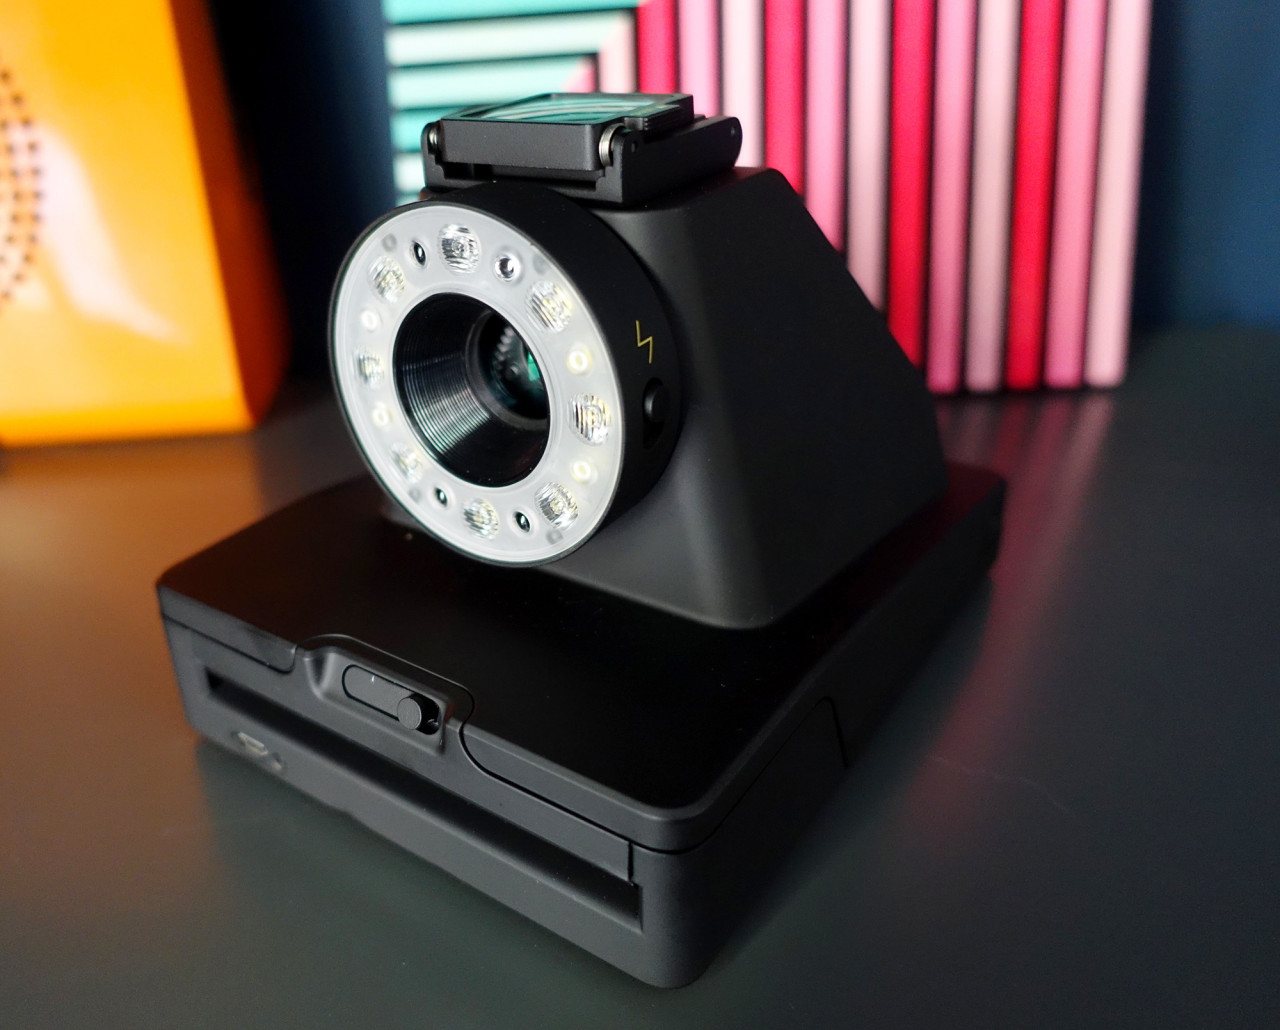 Instant Camera Version 2.0: The Impossible I-1